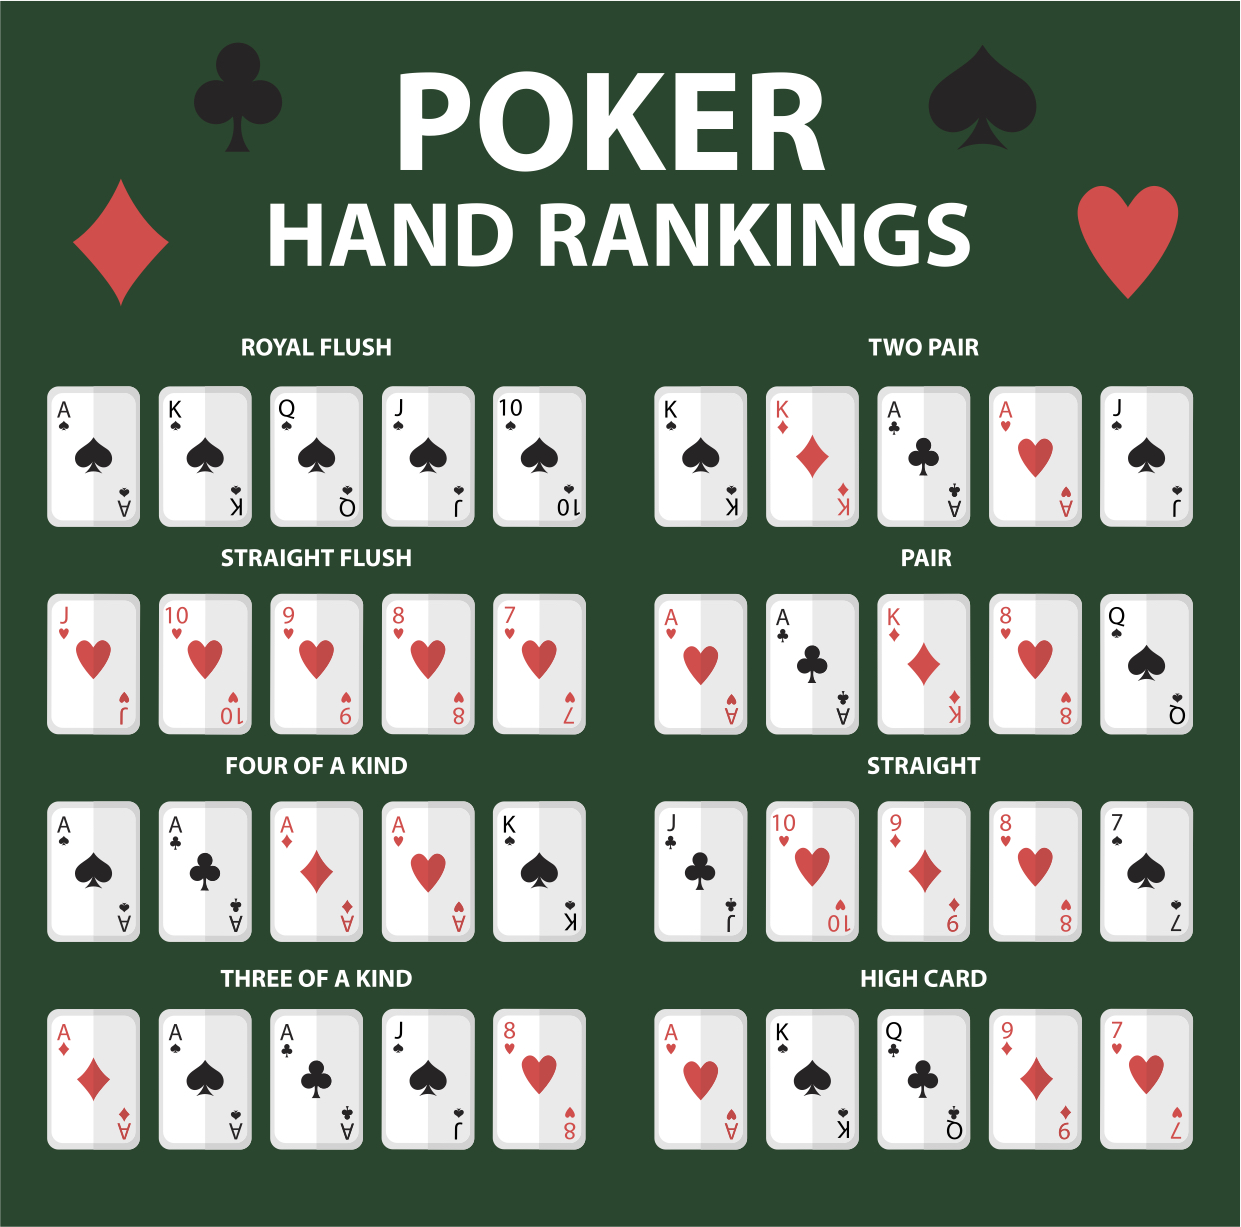 all poker hands in rounders